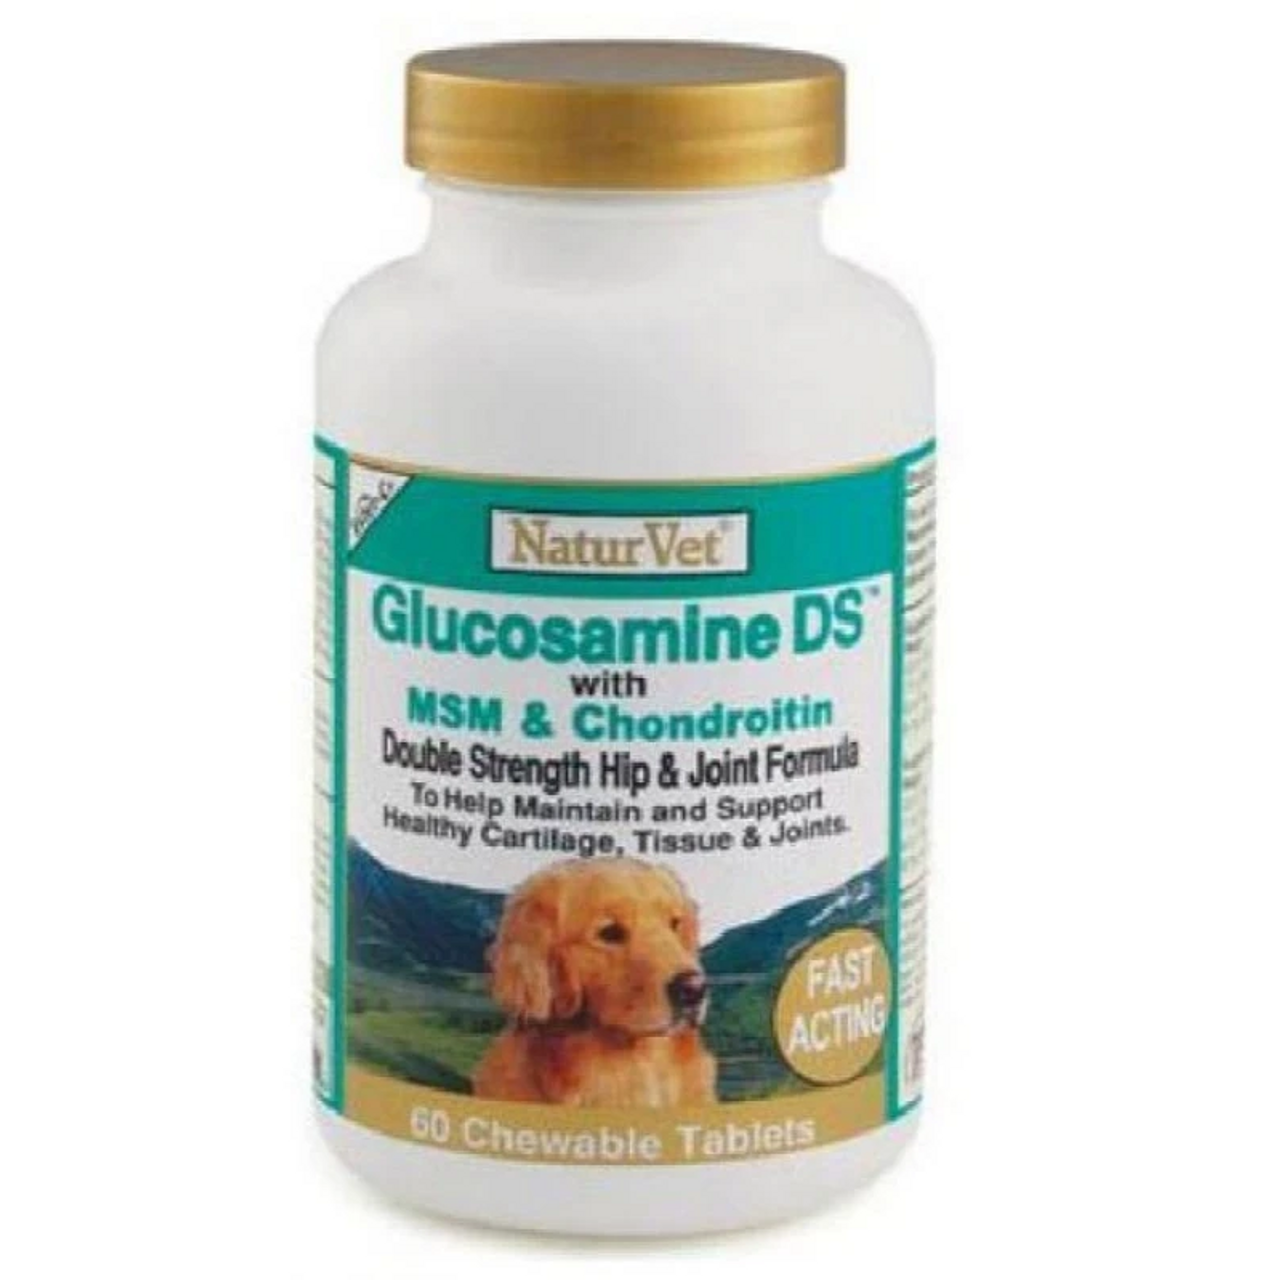 Naturvet Glucosamine DS With MSM & Chondroitin Chewable Tablets